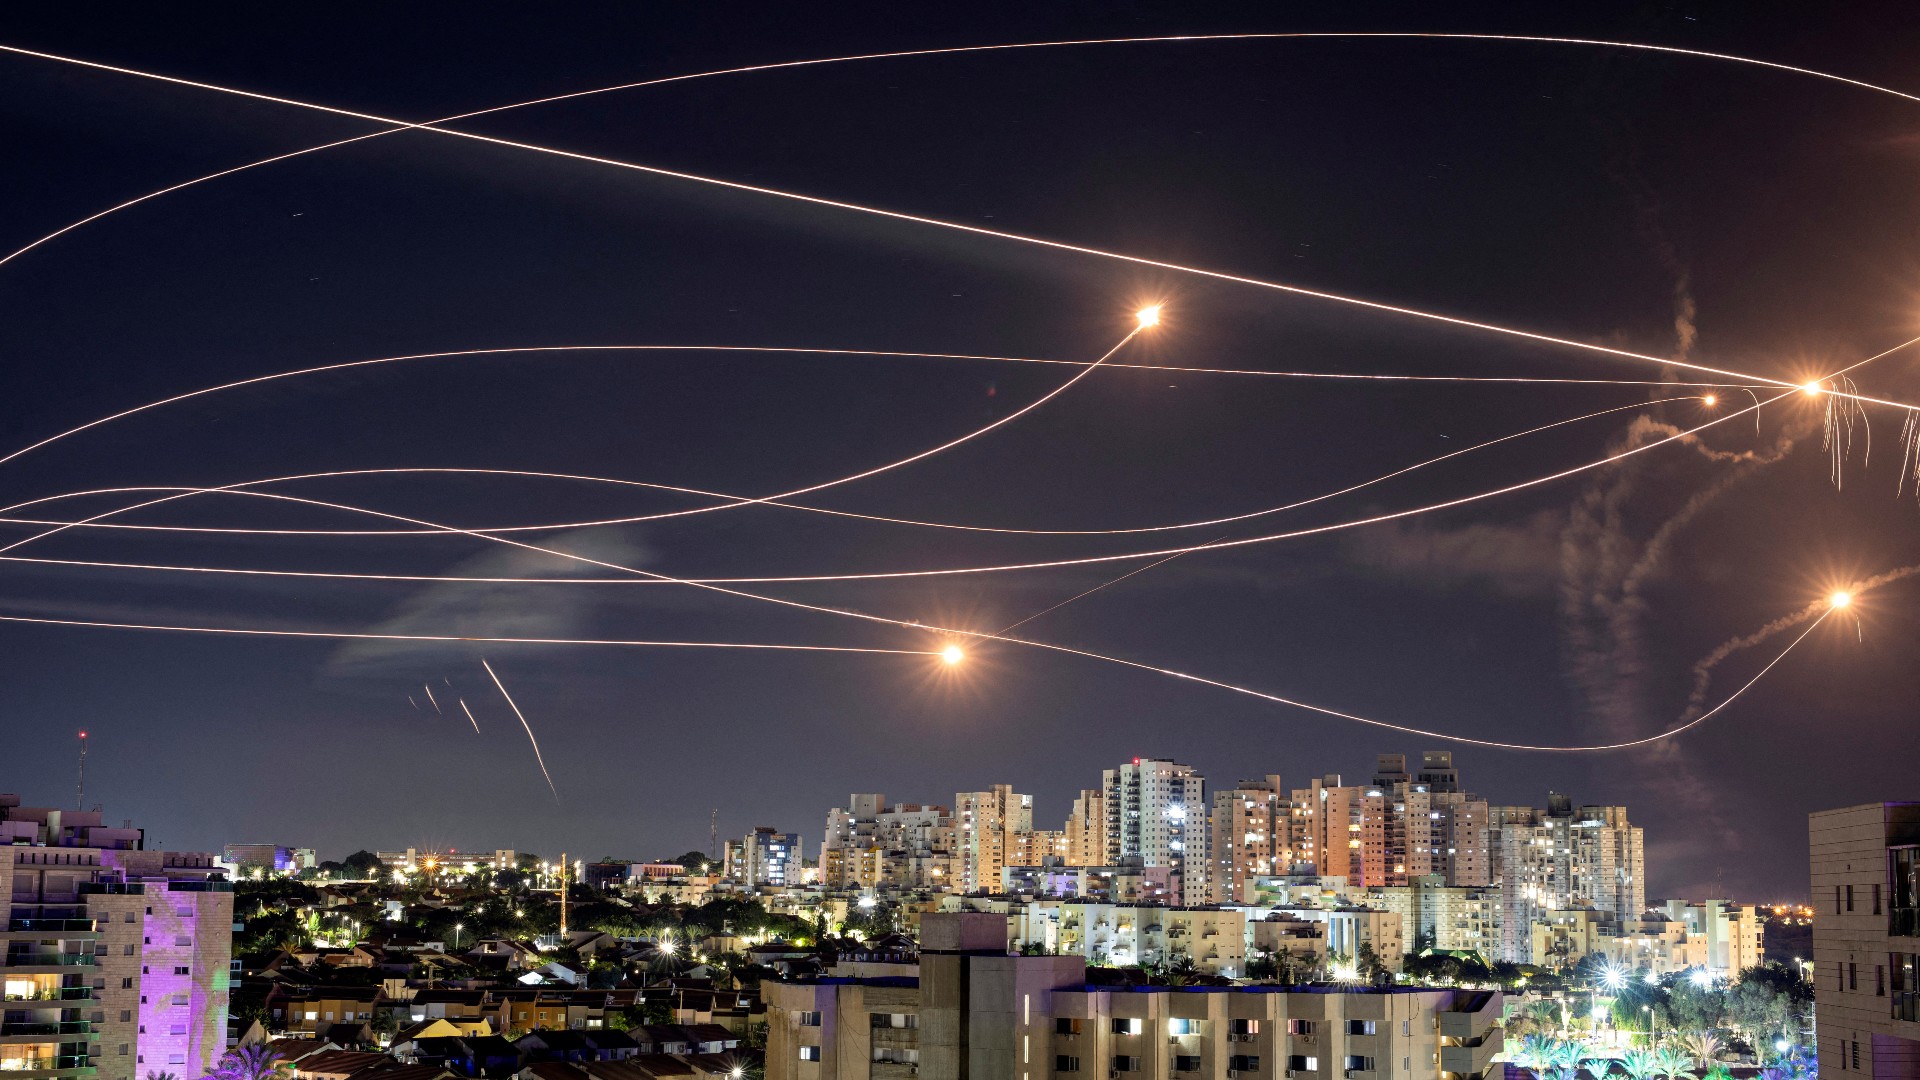 Israel's Iron Dome anti-missile system intercepts rockets launched from the Gaza Strip, as seen from Ashkelon, 20 October (Reuters)